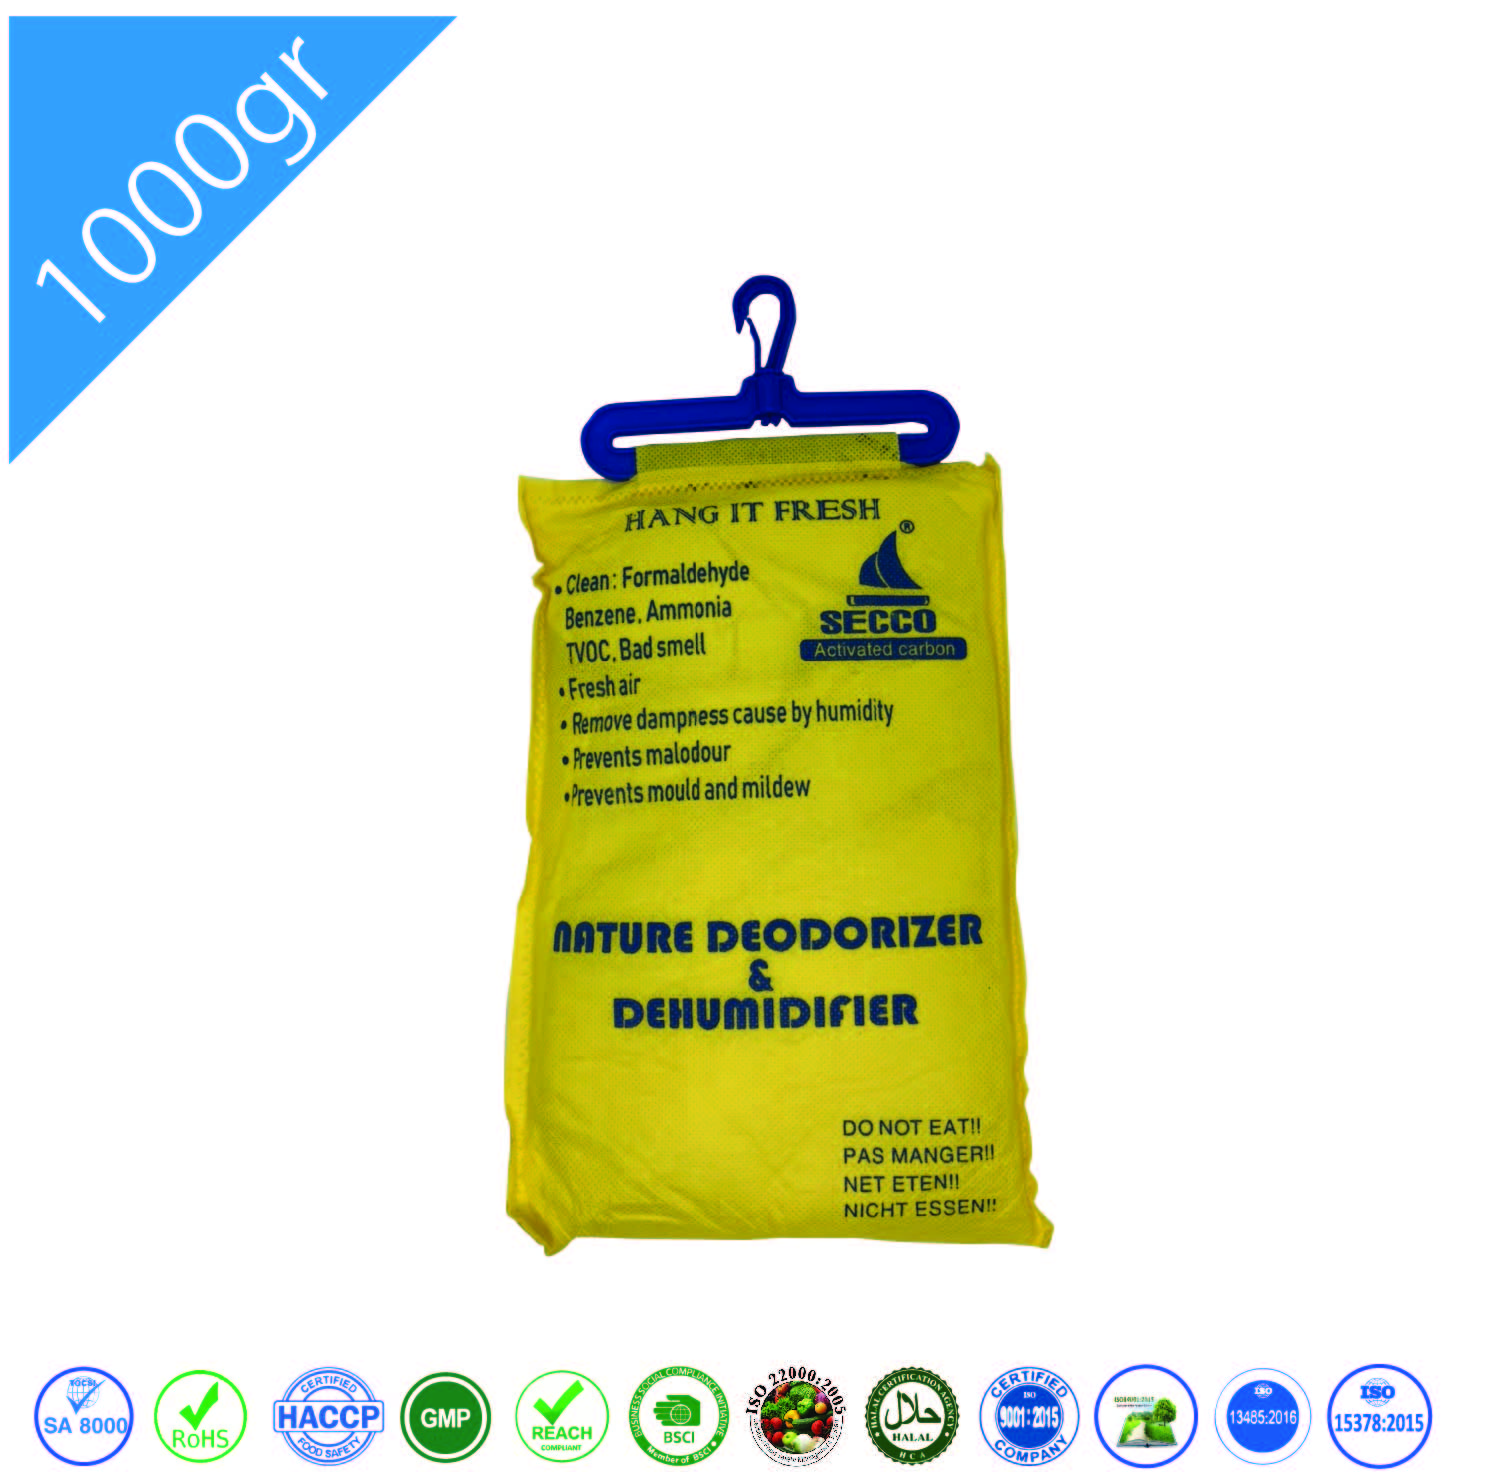 Nature deodorizer and dehumidifier 1kg